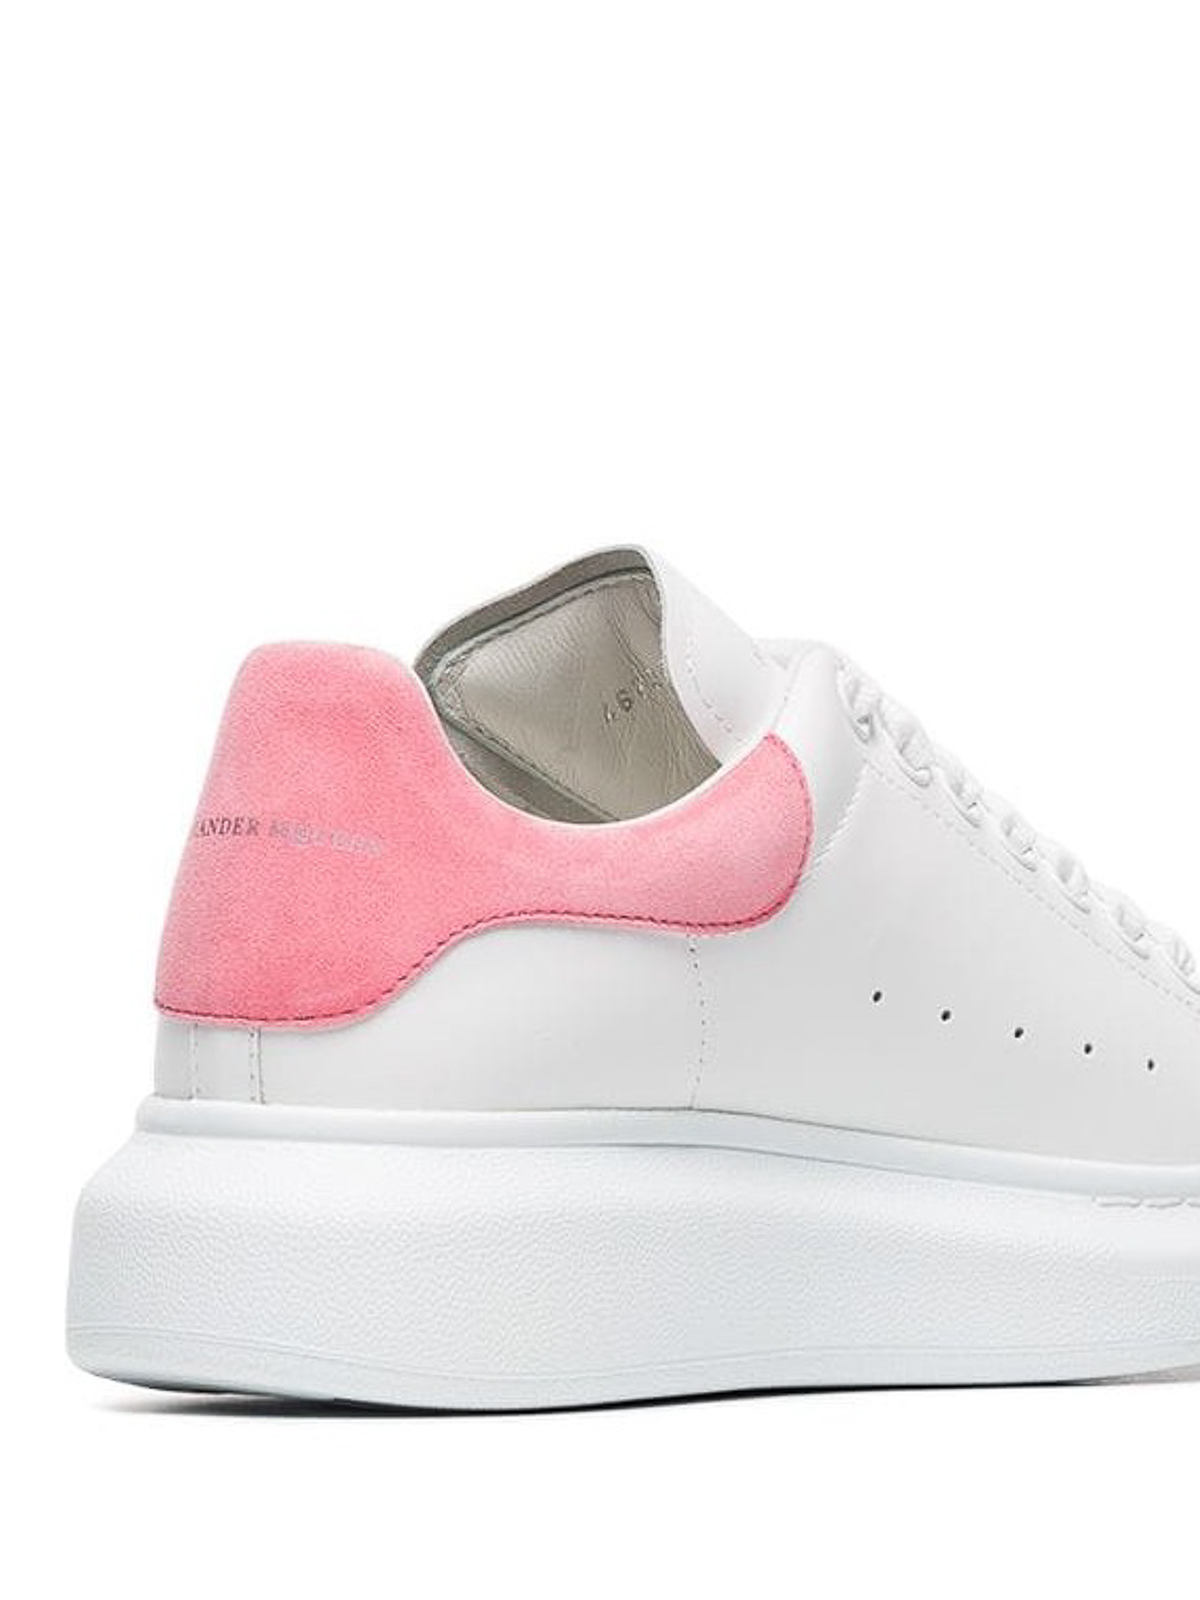 Trainers Alexander Mcqueen pink back white sneakers - 462214WHGP79374